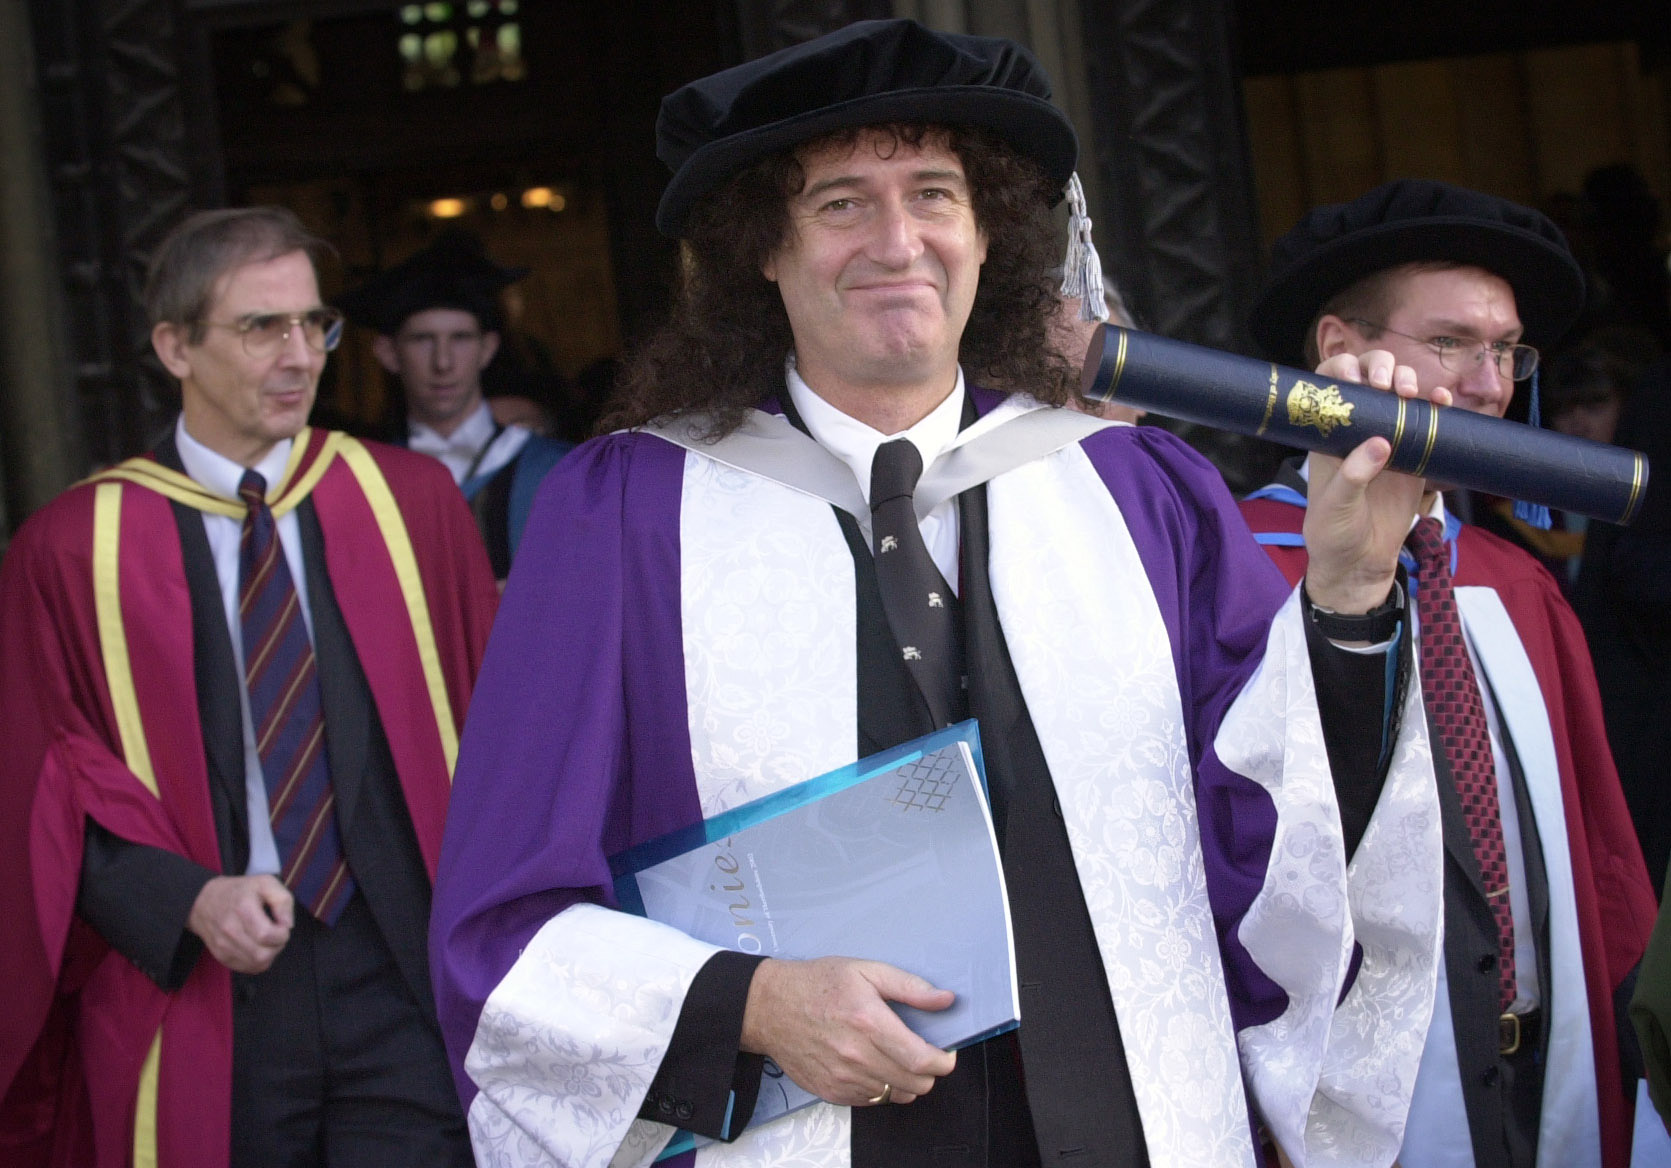 Brian May after he was awarded an honorary Doctorate of Science by the University of Hertfordshire in St Albans, on November 19, 2002. | Source: Getty Images